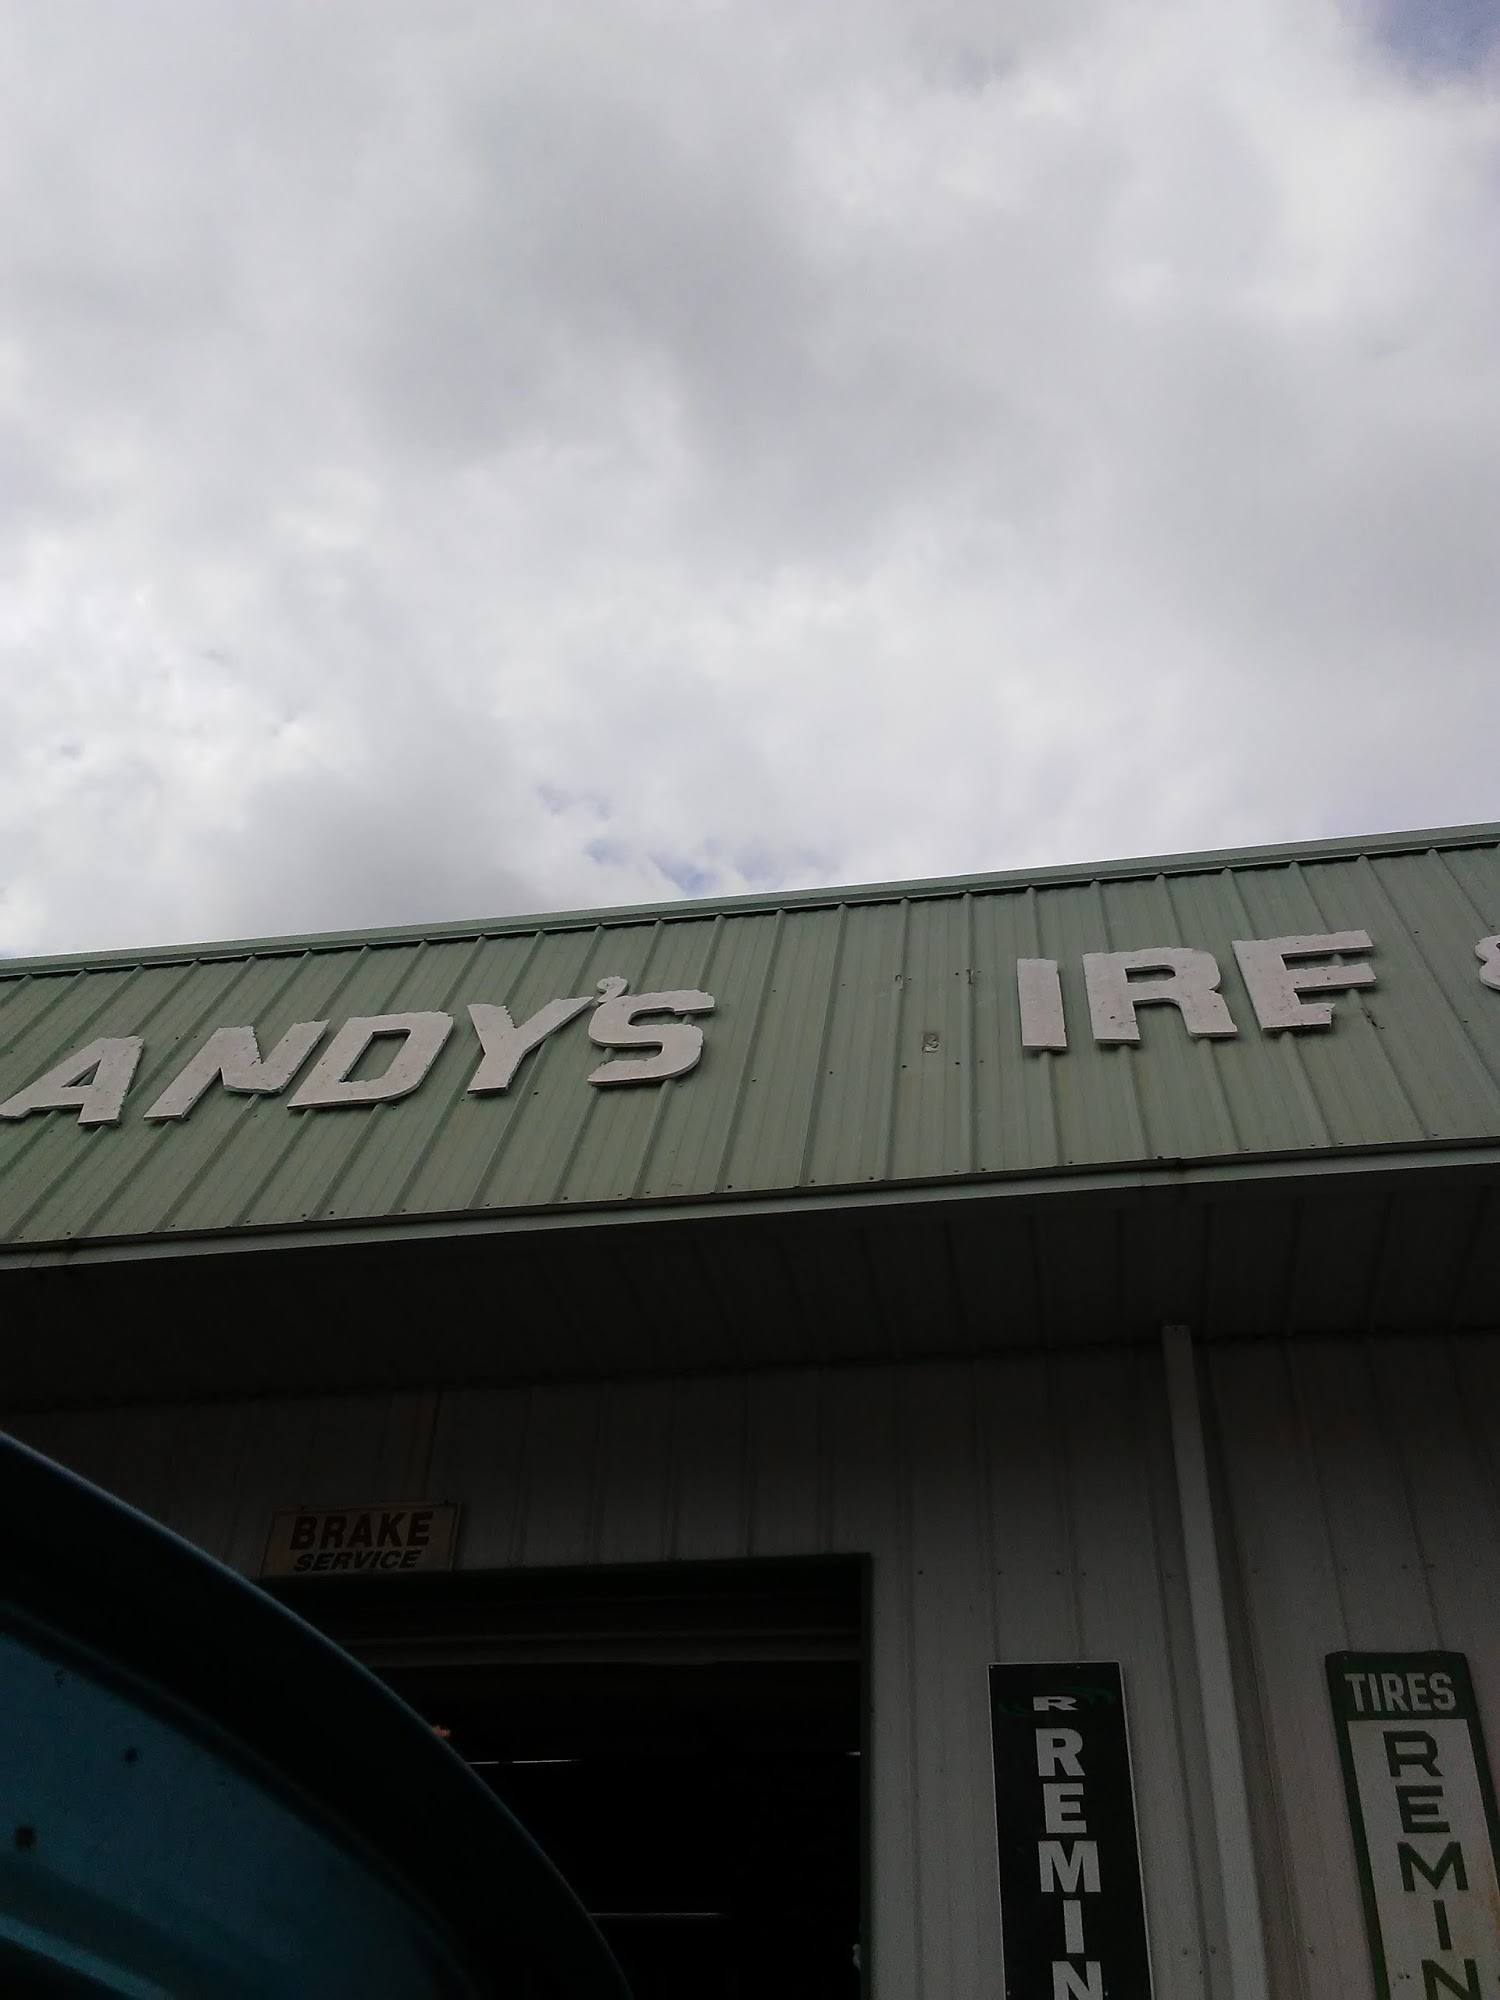 Andy's Tire Store